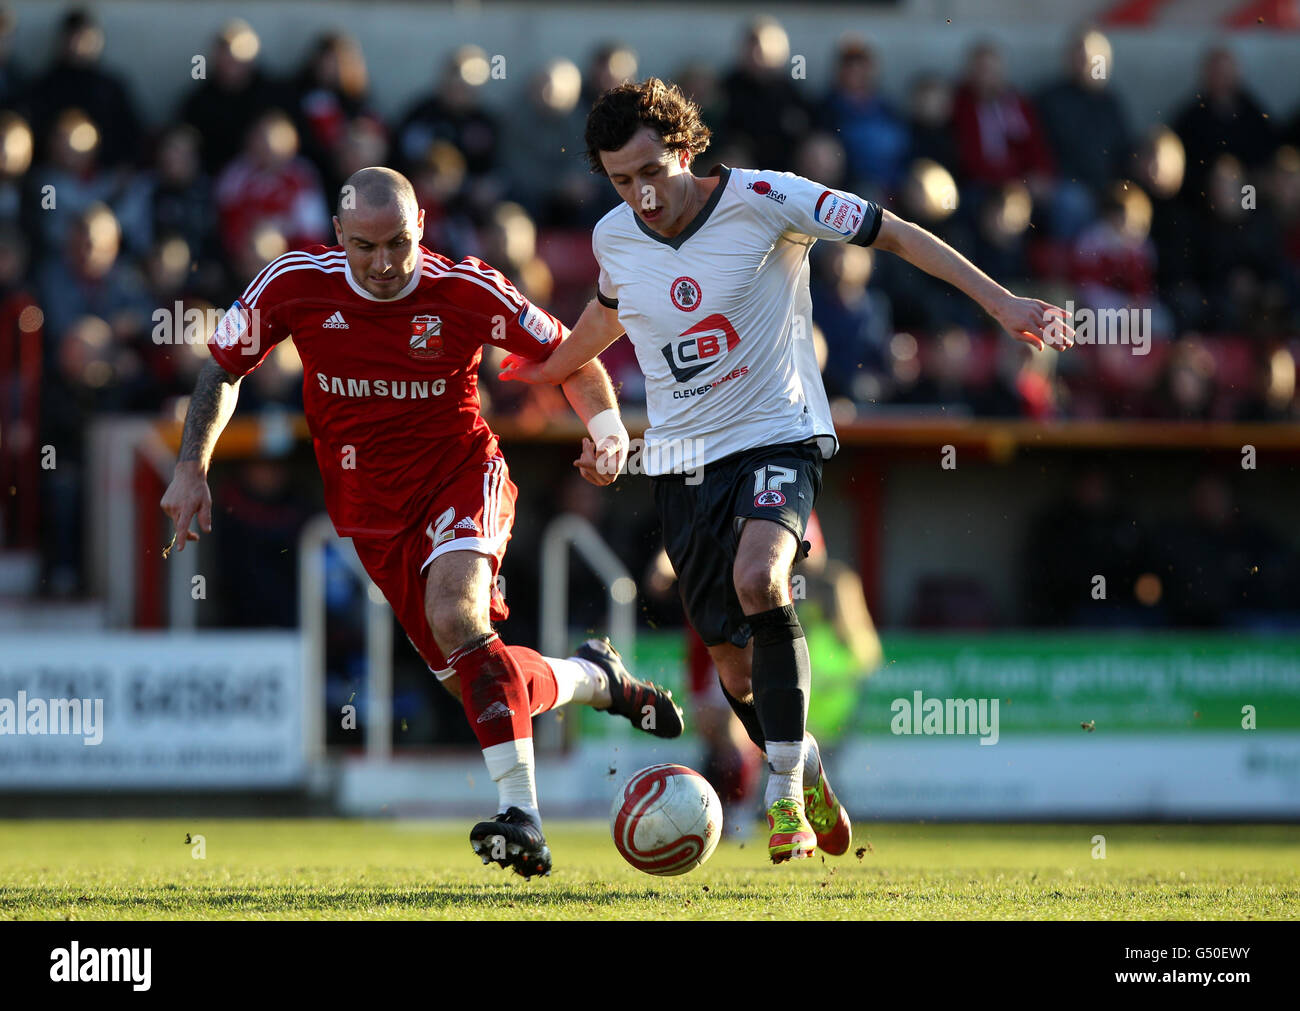 Swindon Town's Alan McCormack (left) battles for possession of the ball with Accrington Stanley's Jamie Devitt during the npower League Two match at The County Ground, Swindon. Stock Photo